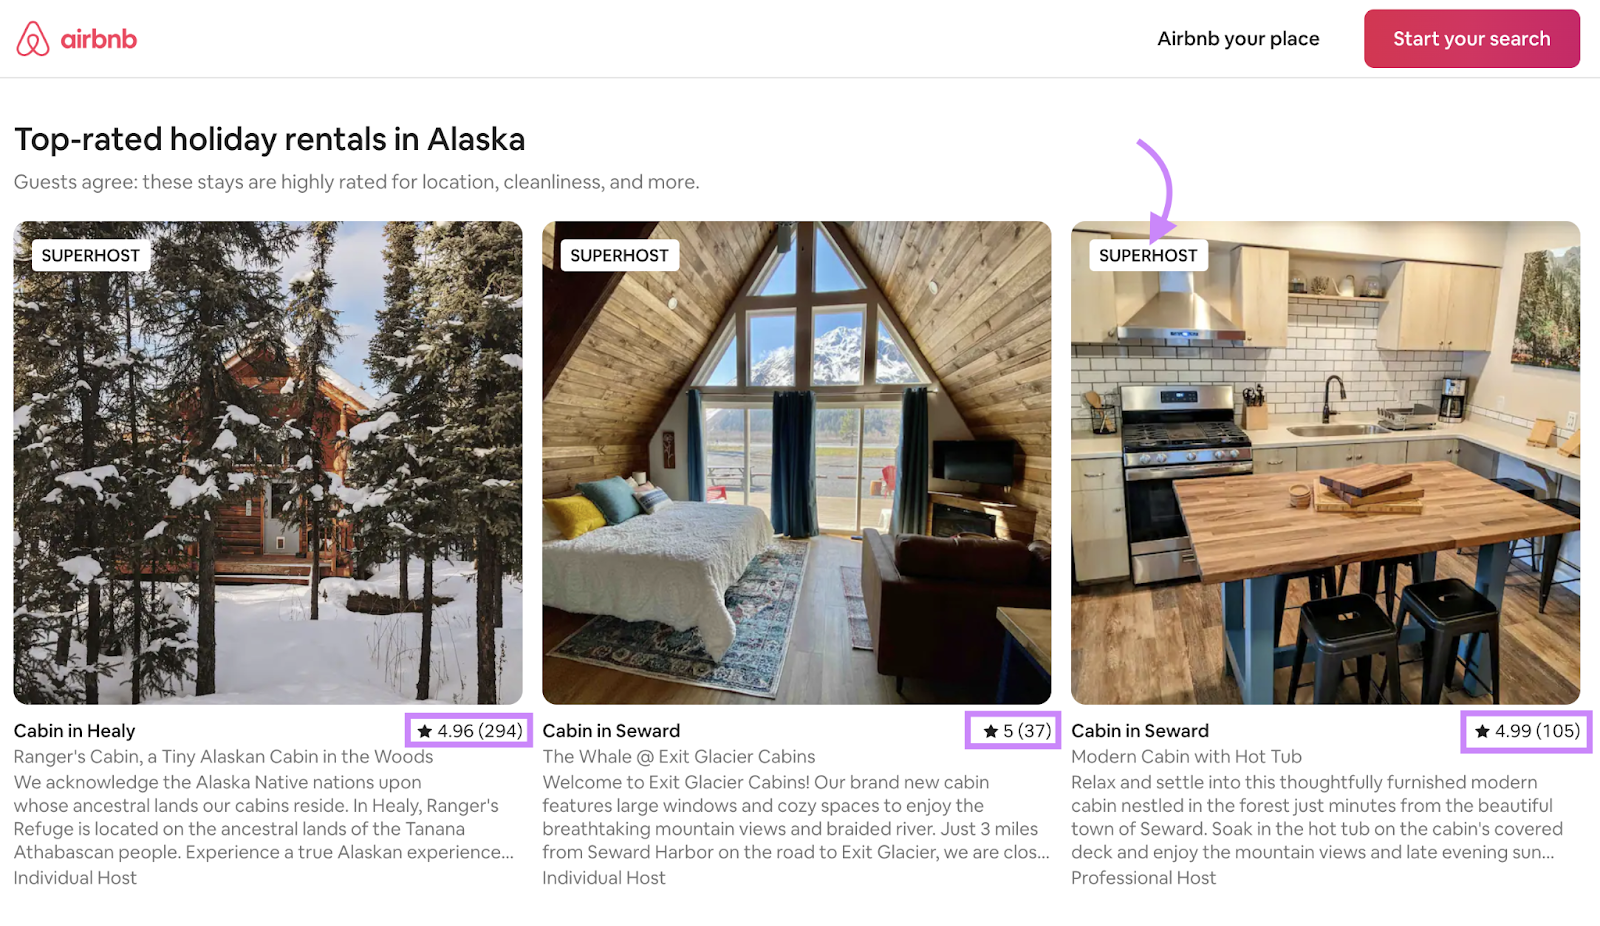 Airbnb’s landing page about top-rated rentals in Alaska